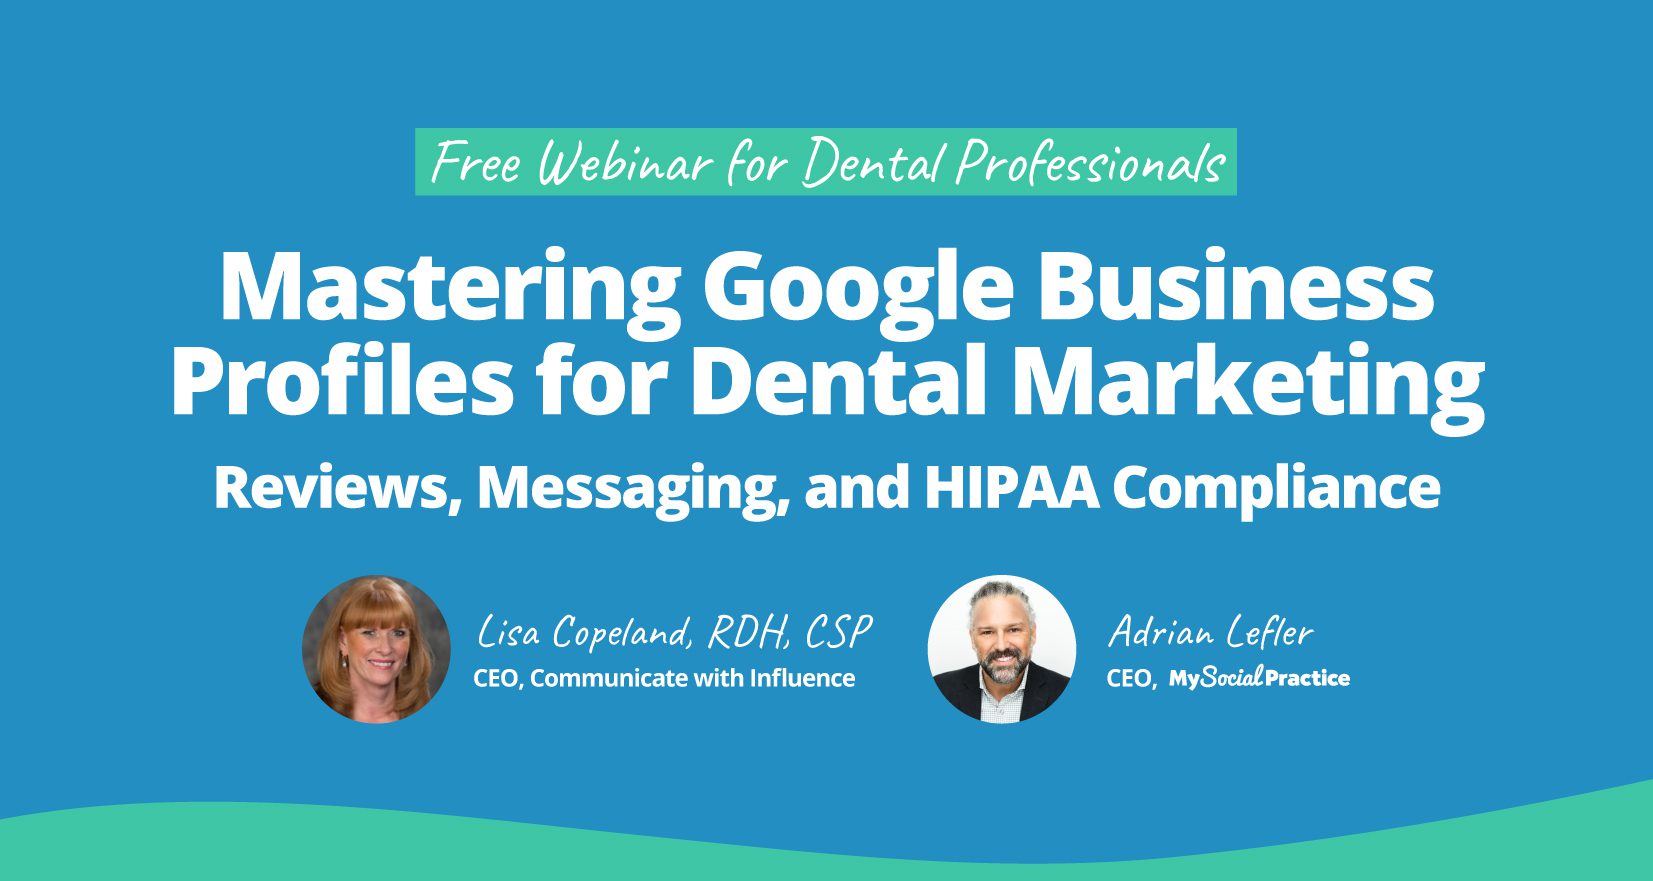 My Social Practice - Social Media Marketing for Dental & Dental Specialty Practices - Marketing Strategies for Orthodontists